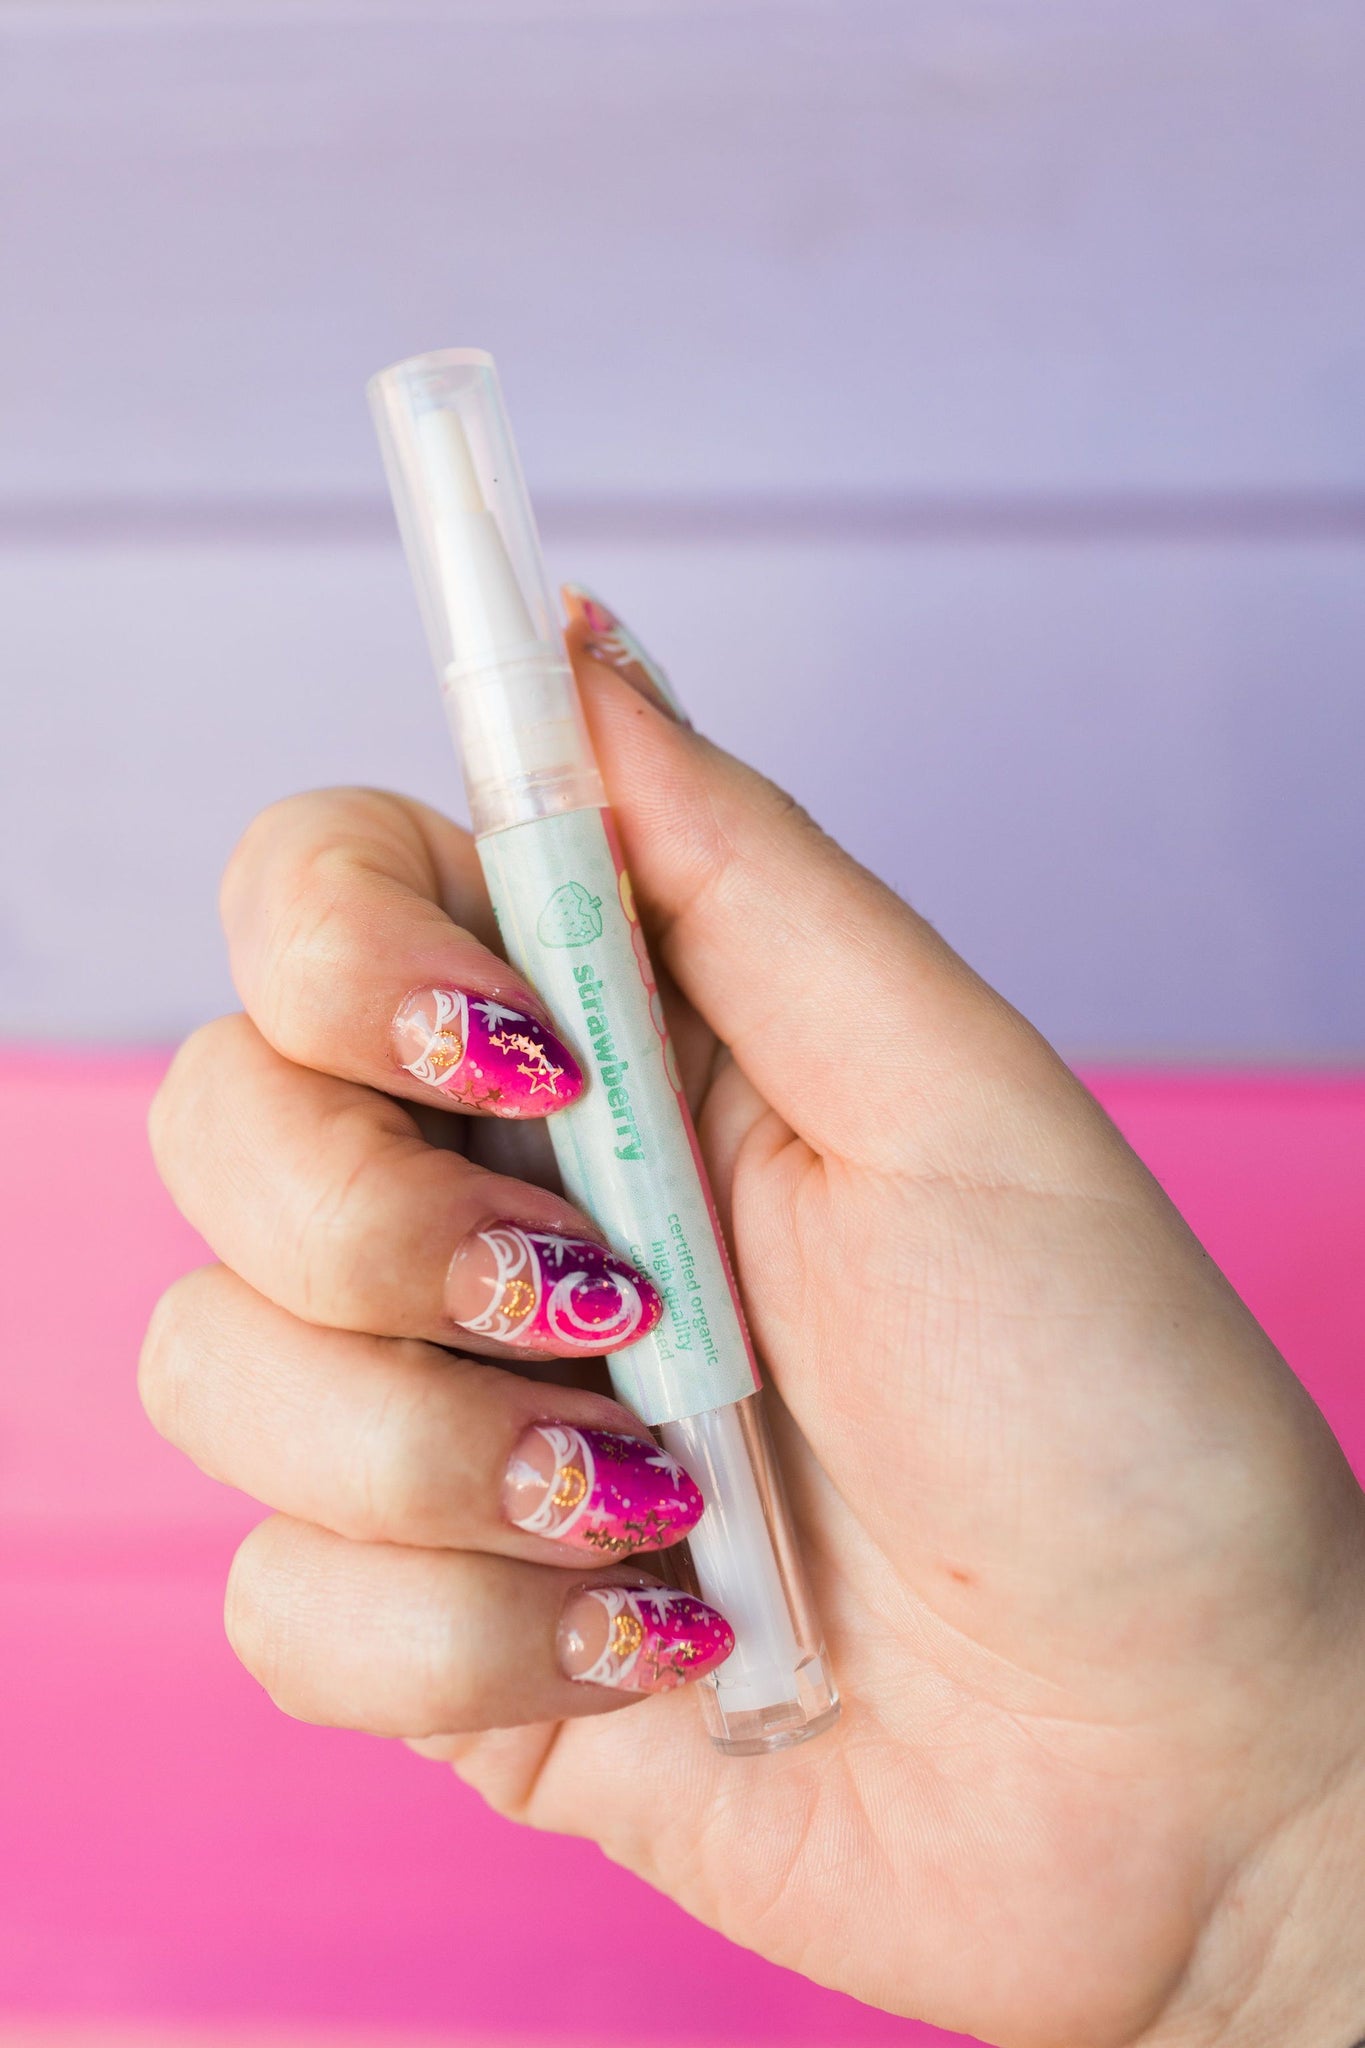 Simple DIY cuticle oil recipe to Strengthen Nails and Dry Cuticles -  SimplyBeyondHerbs